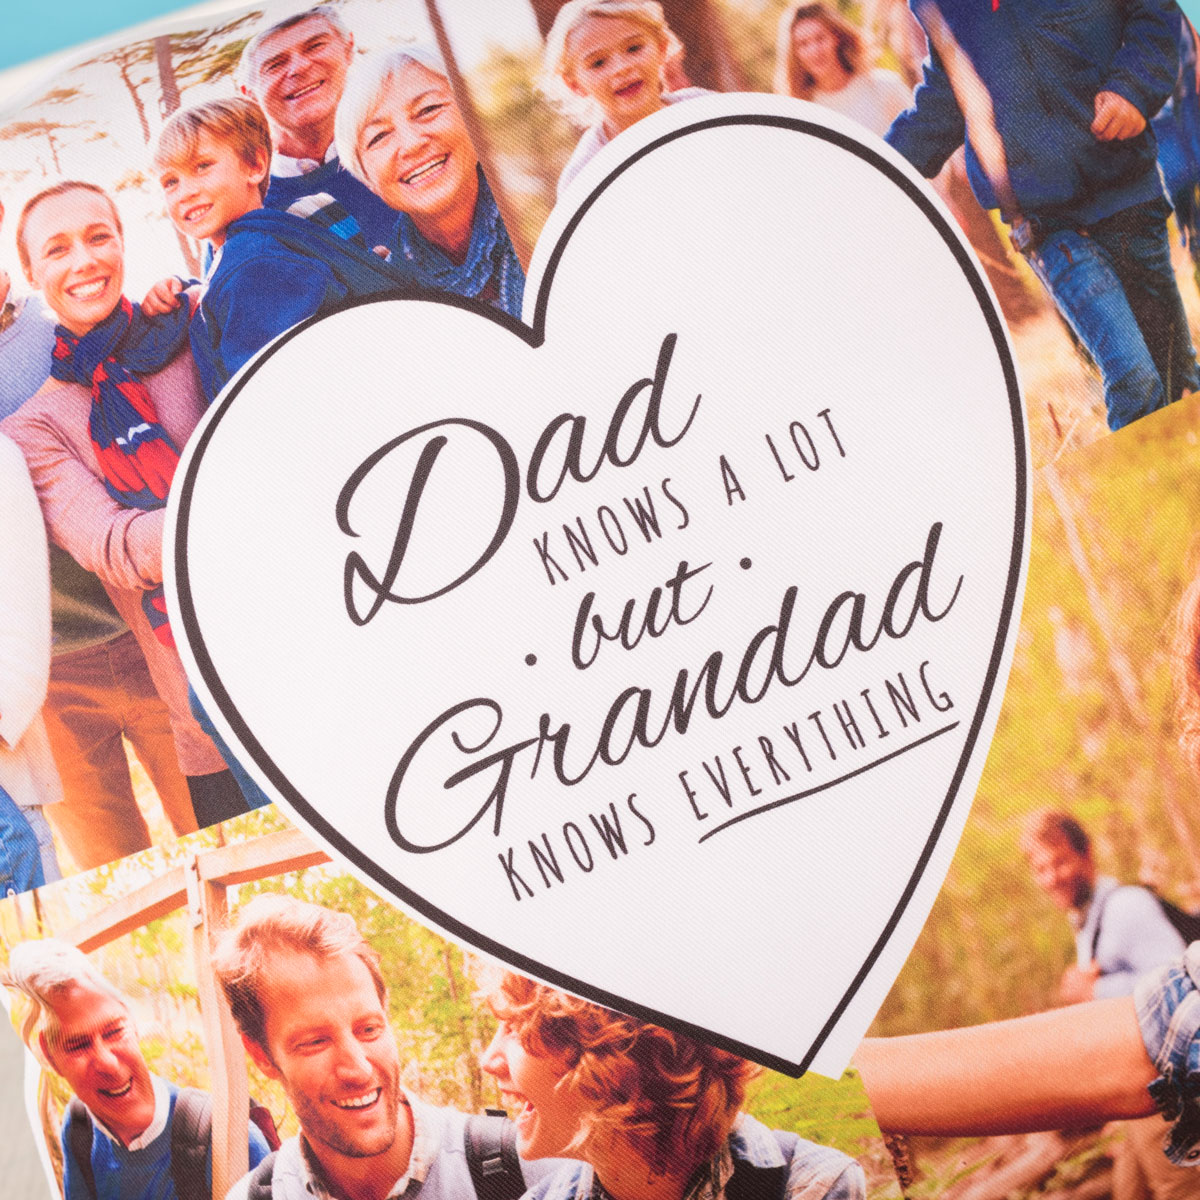 Multi Photo Cushion - Dad Knows A Lot But Grandad Knows Everything